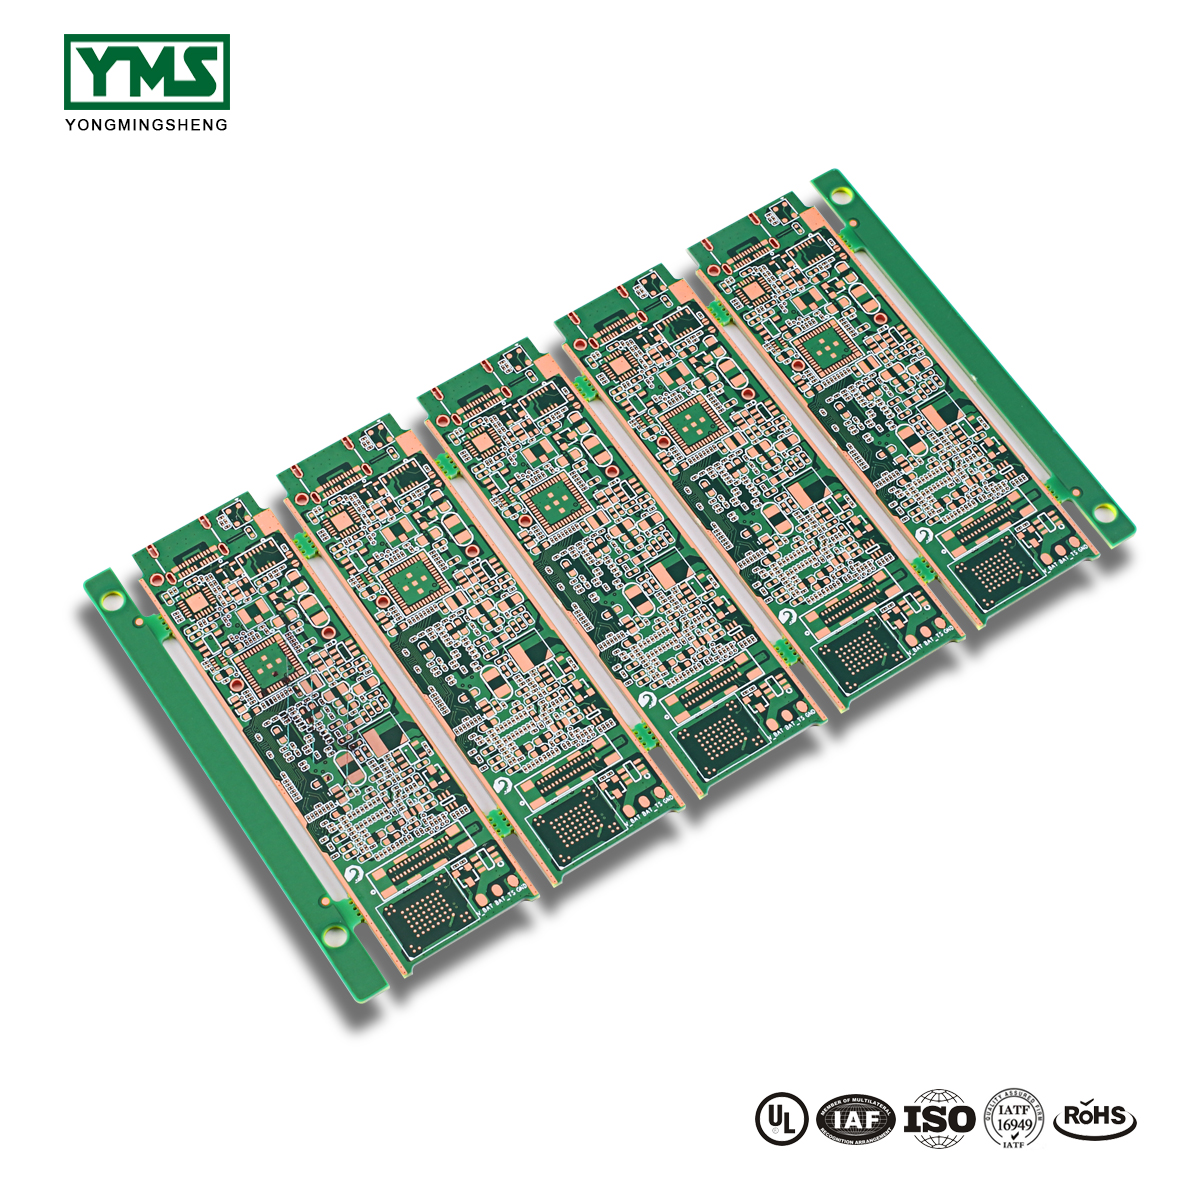 Fixed Competitive Price 2 Step Hdi Board - 12 Layer 2 Step HDI Board | YMS PCB – Yongmingsheng